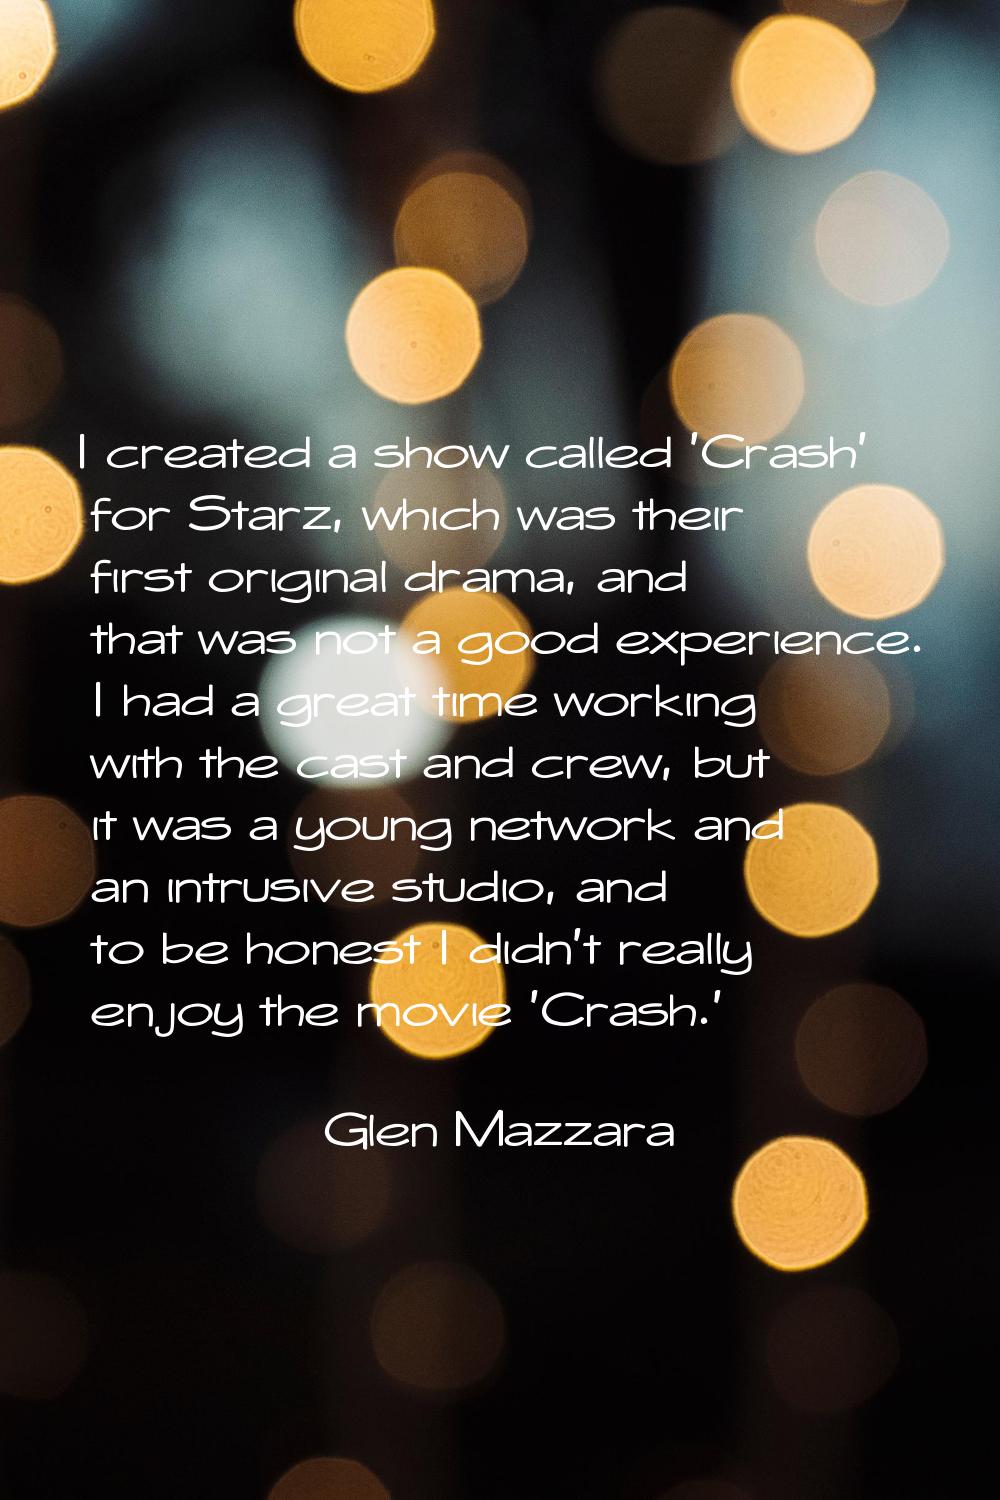 I created a show called 'Crash' for Starz, which was their first original drama, and that was not a